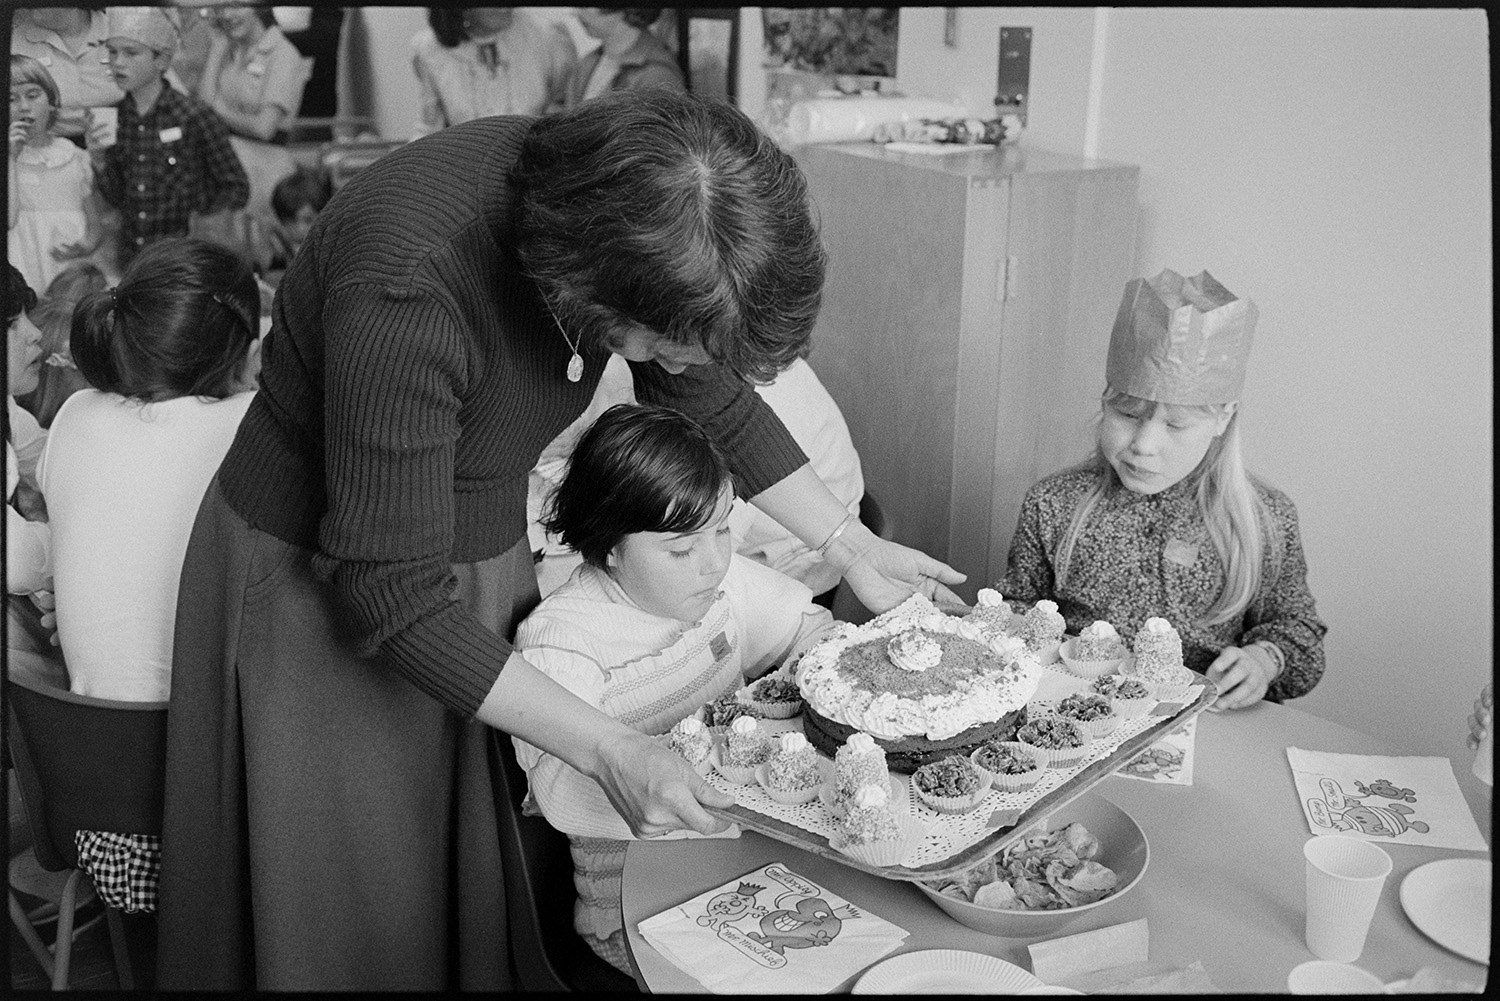 Party in children's ward of Hospital, food and drink served by nurses, buns, cakes. <br />
[A woman serving cake to two children at a party on the Children's Ward at Barnstaple General Hospital.]